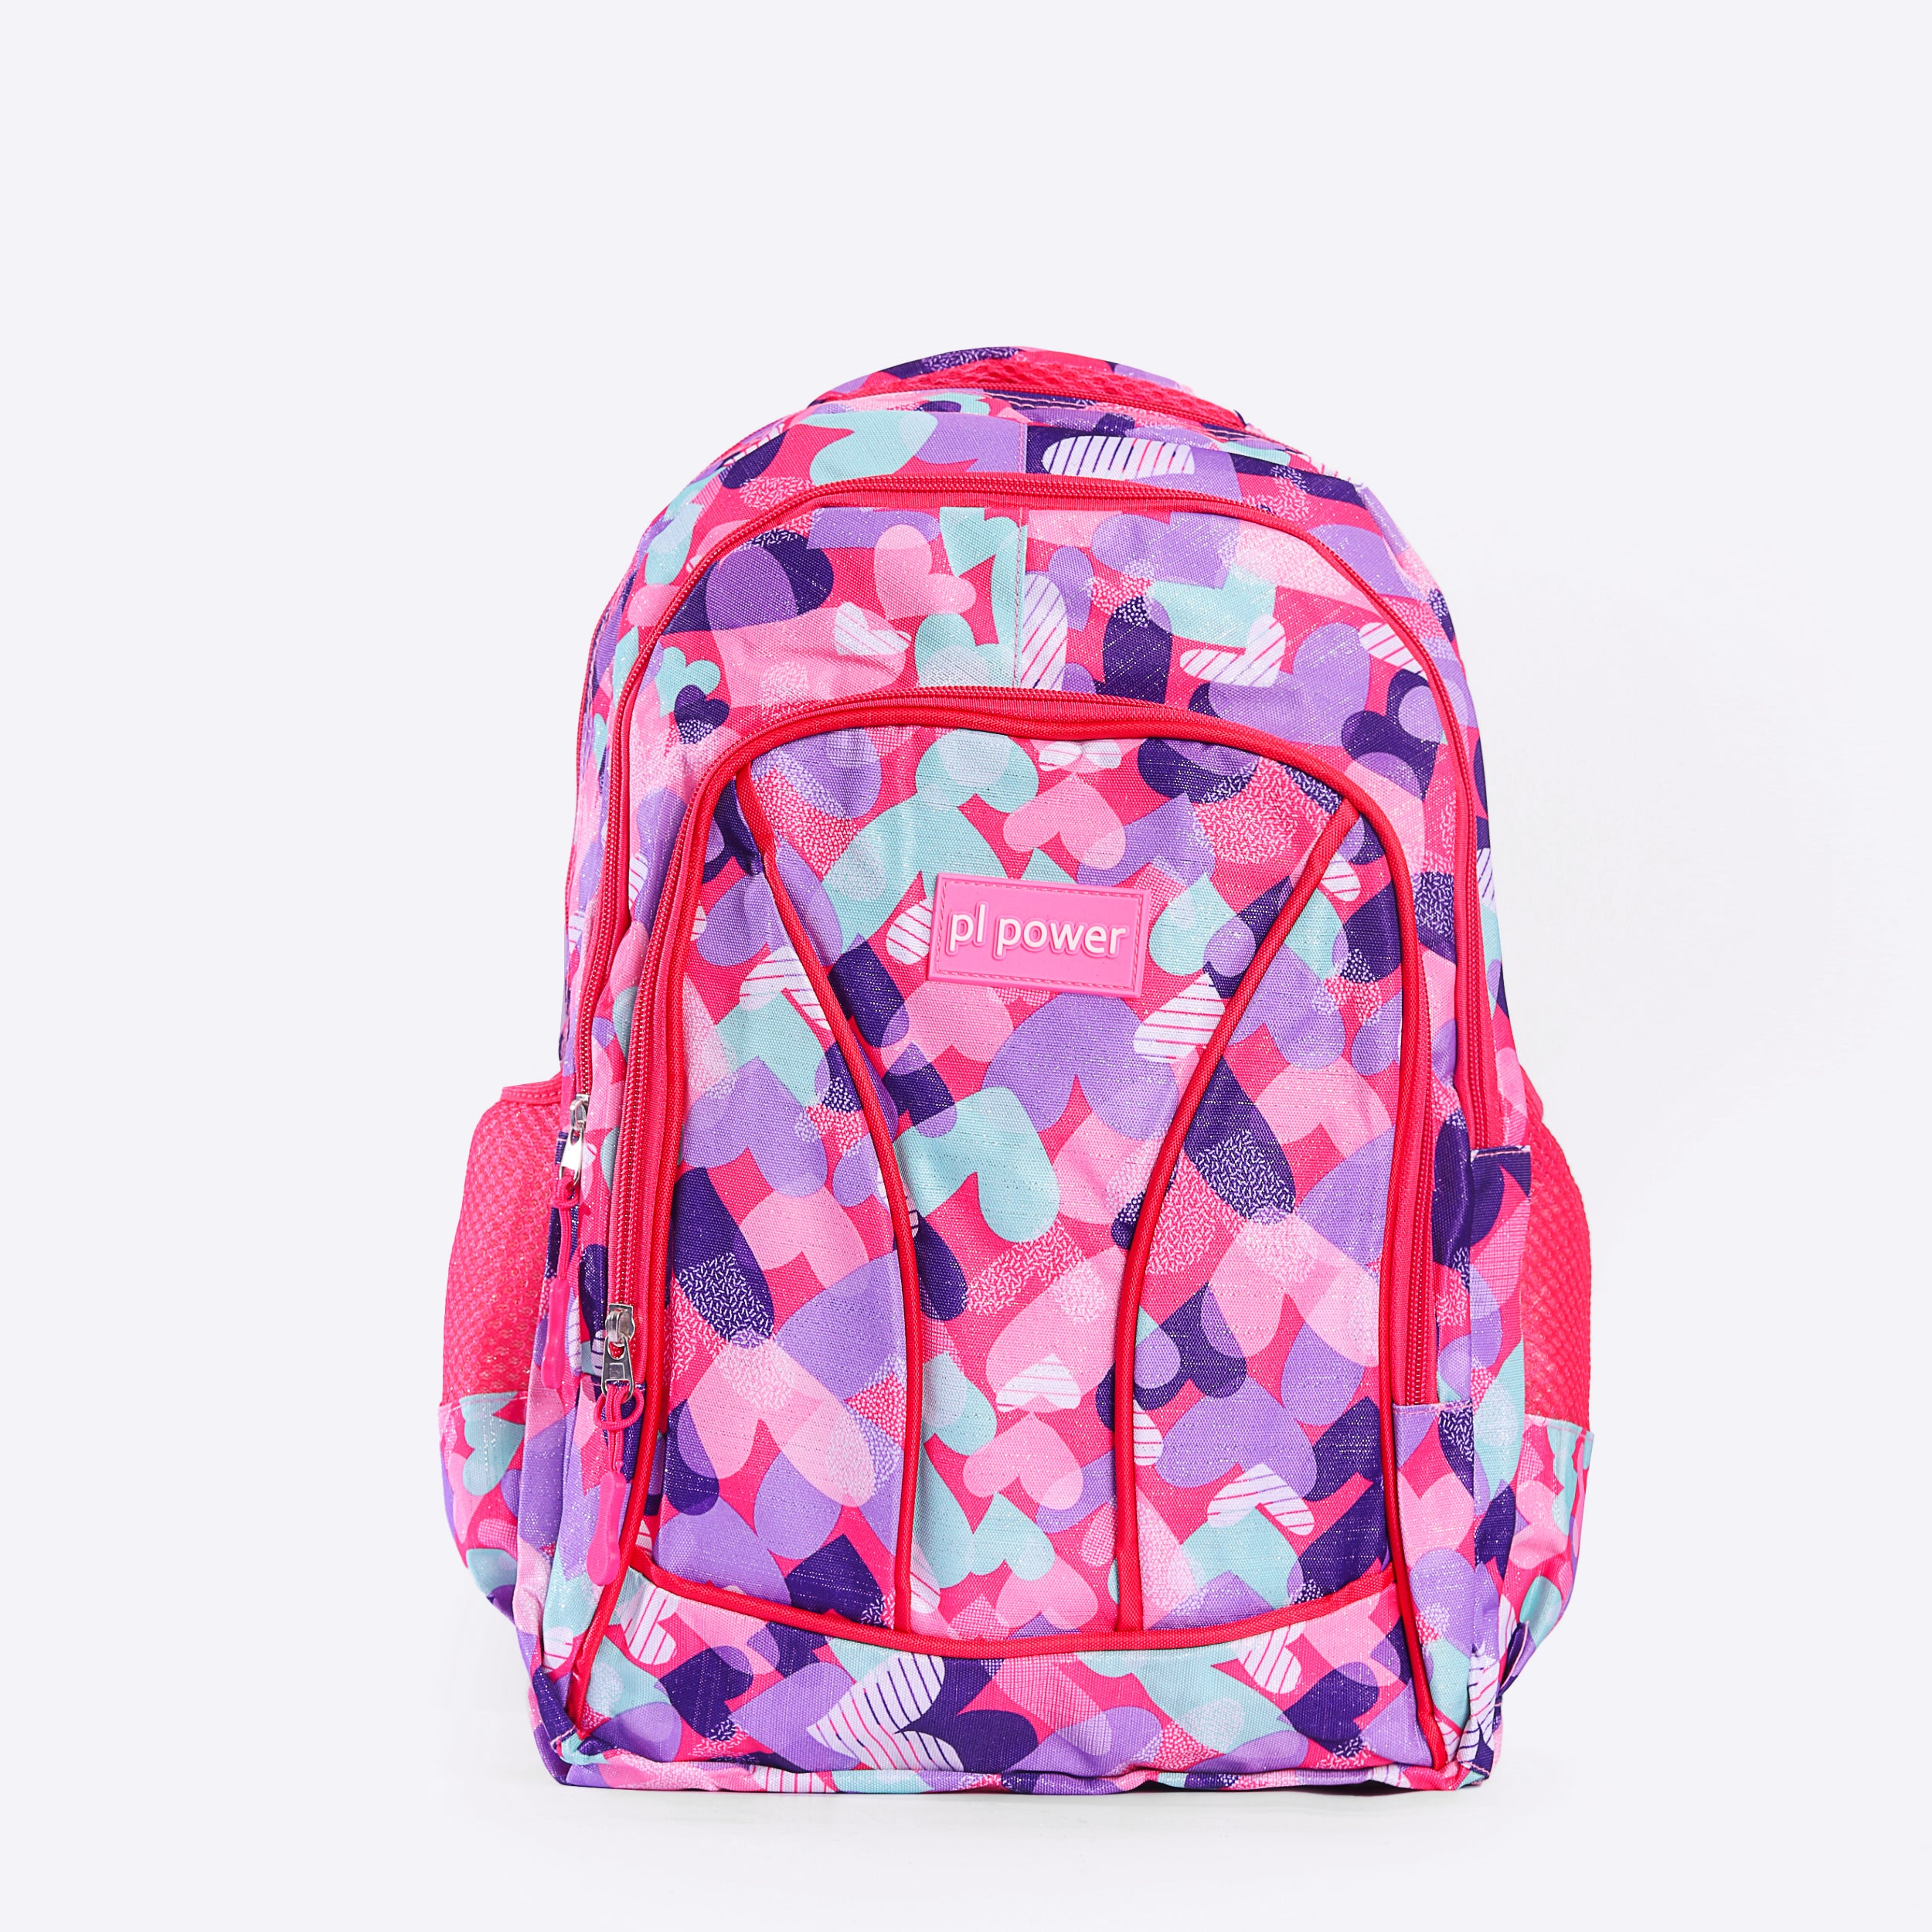 Colorful Hearts School Bag For Kids